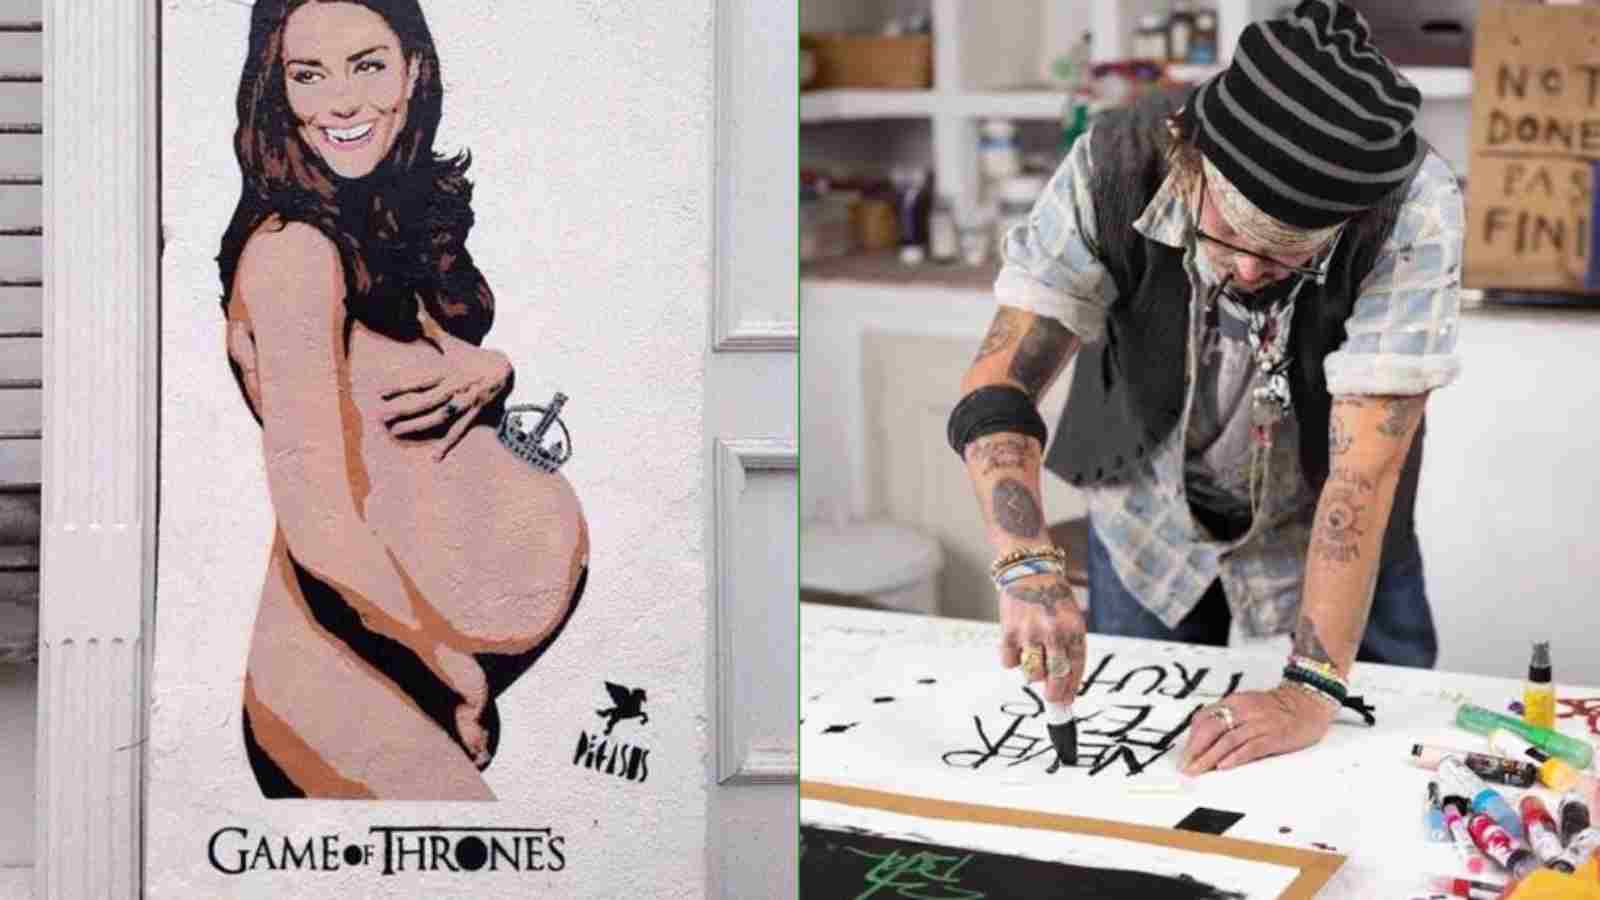 Pegasus' nude painting of Kate Middleton which Johnny Depp bought for a large amount